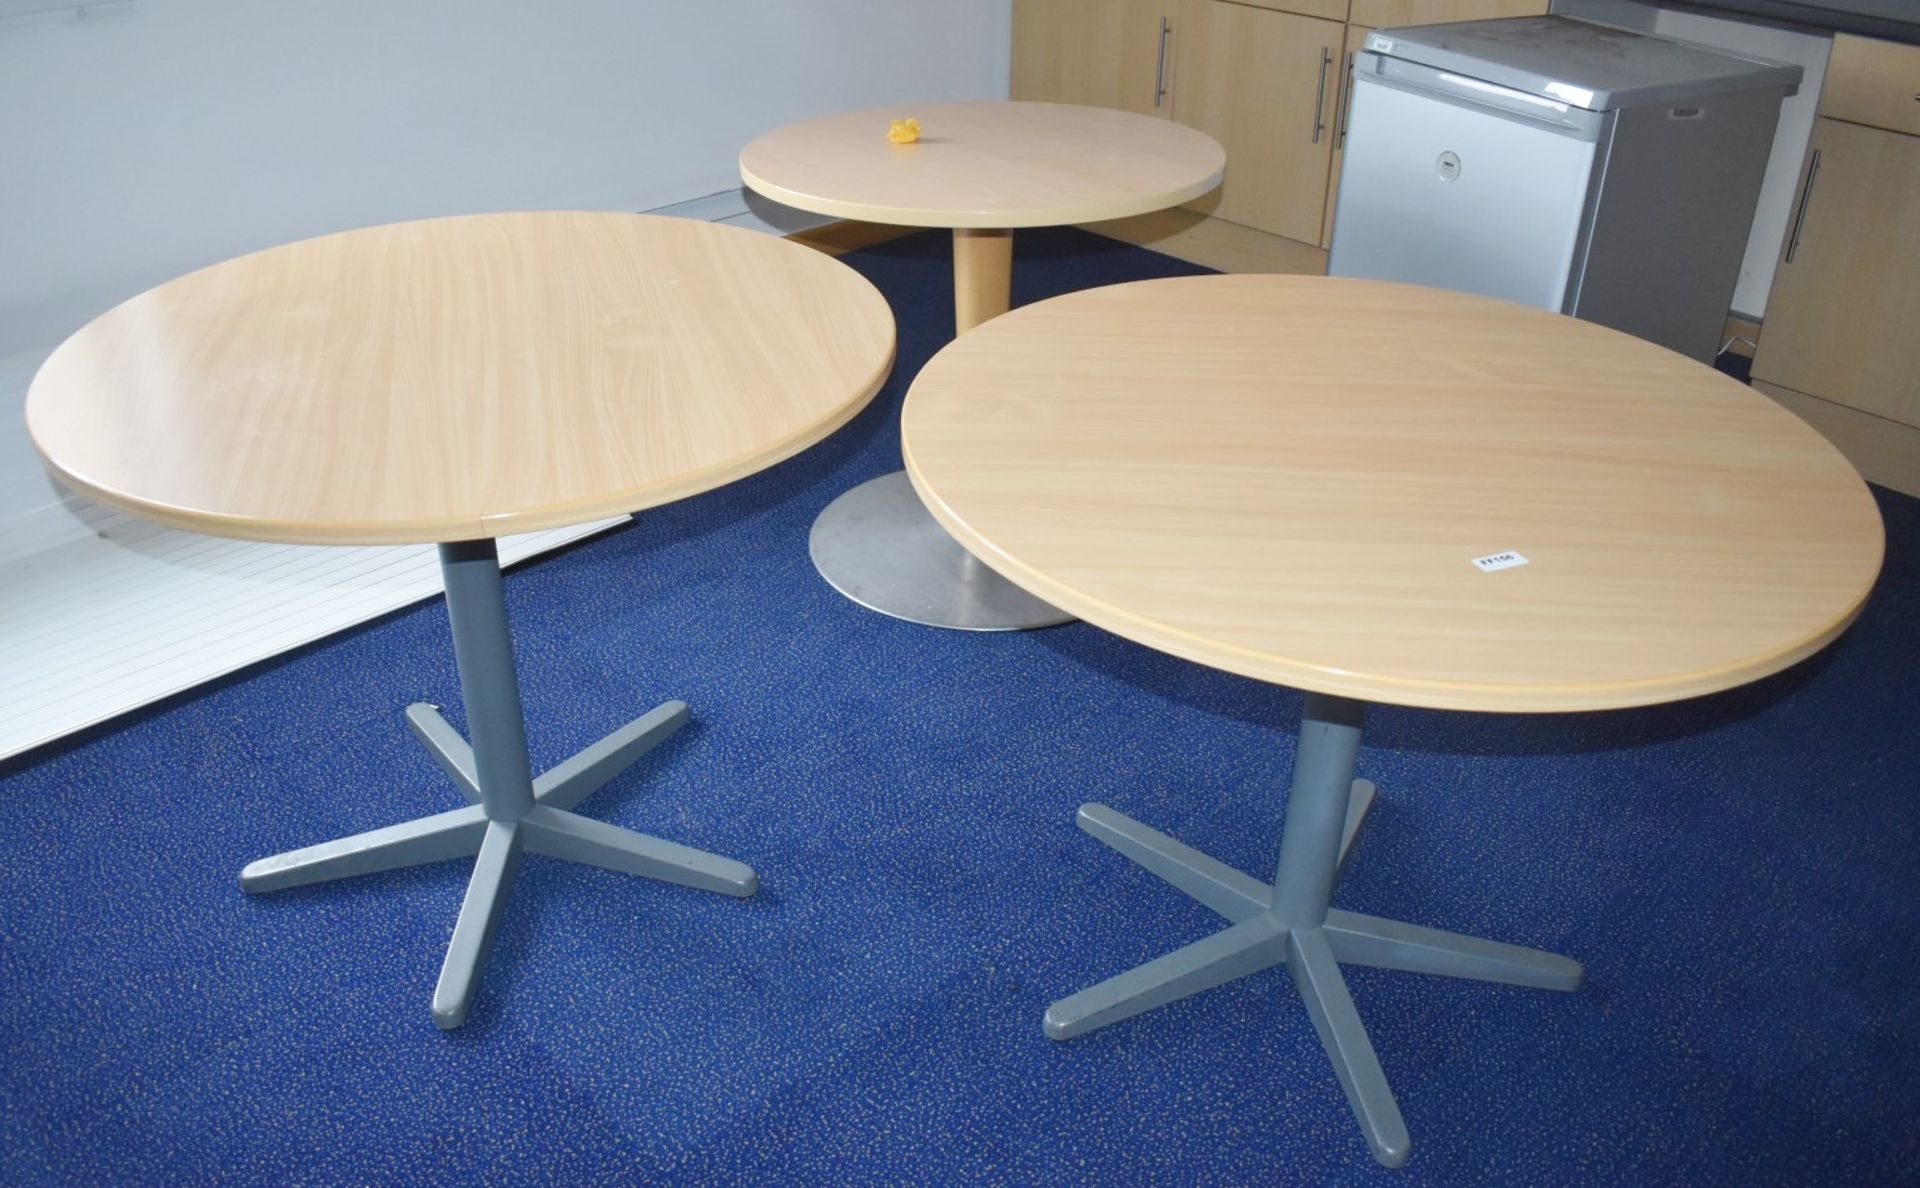 3 x Round Canteen Staff Room Tables in Beech With 8 x Plastic Chairs in Black and Red and 2 x Office